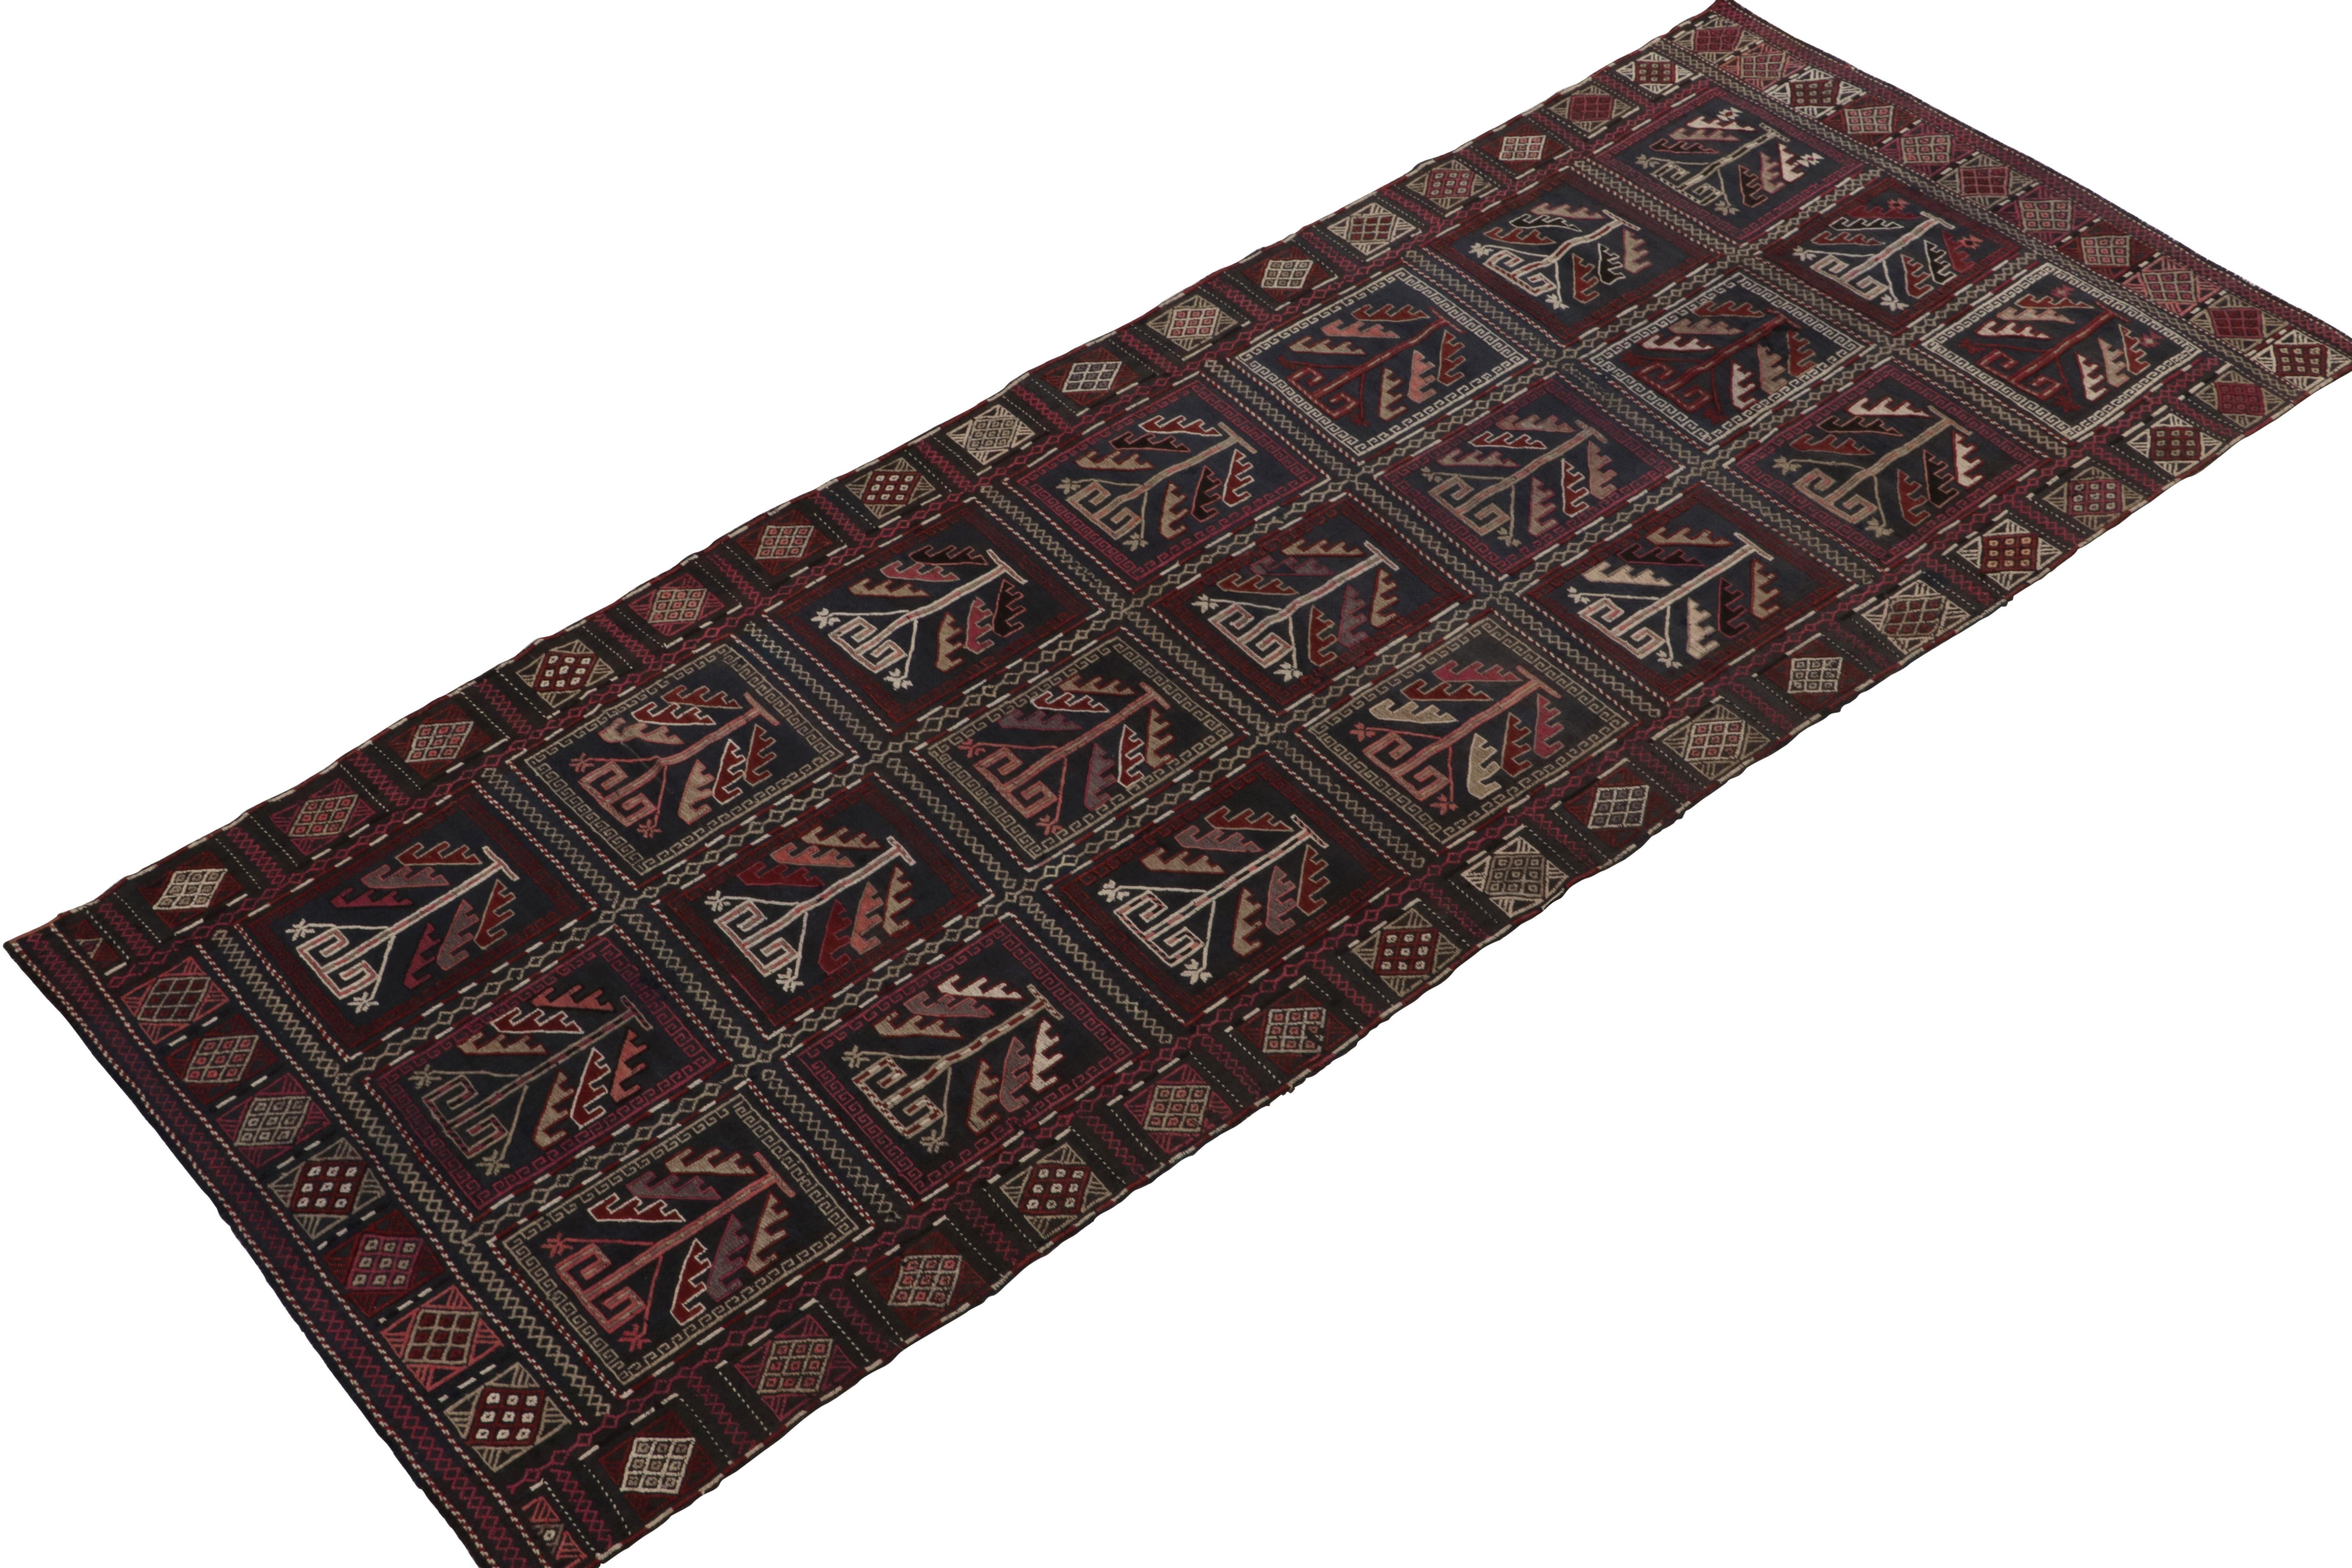 Originating between 1920-1930, a rare 4x10 antique Caucasian kilim rug believed to be of Russian tribal provenance. 

Handwoven in all wool, the gorgeous design witnesses meticulously embroidered elements for its time and lineage. The employment